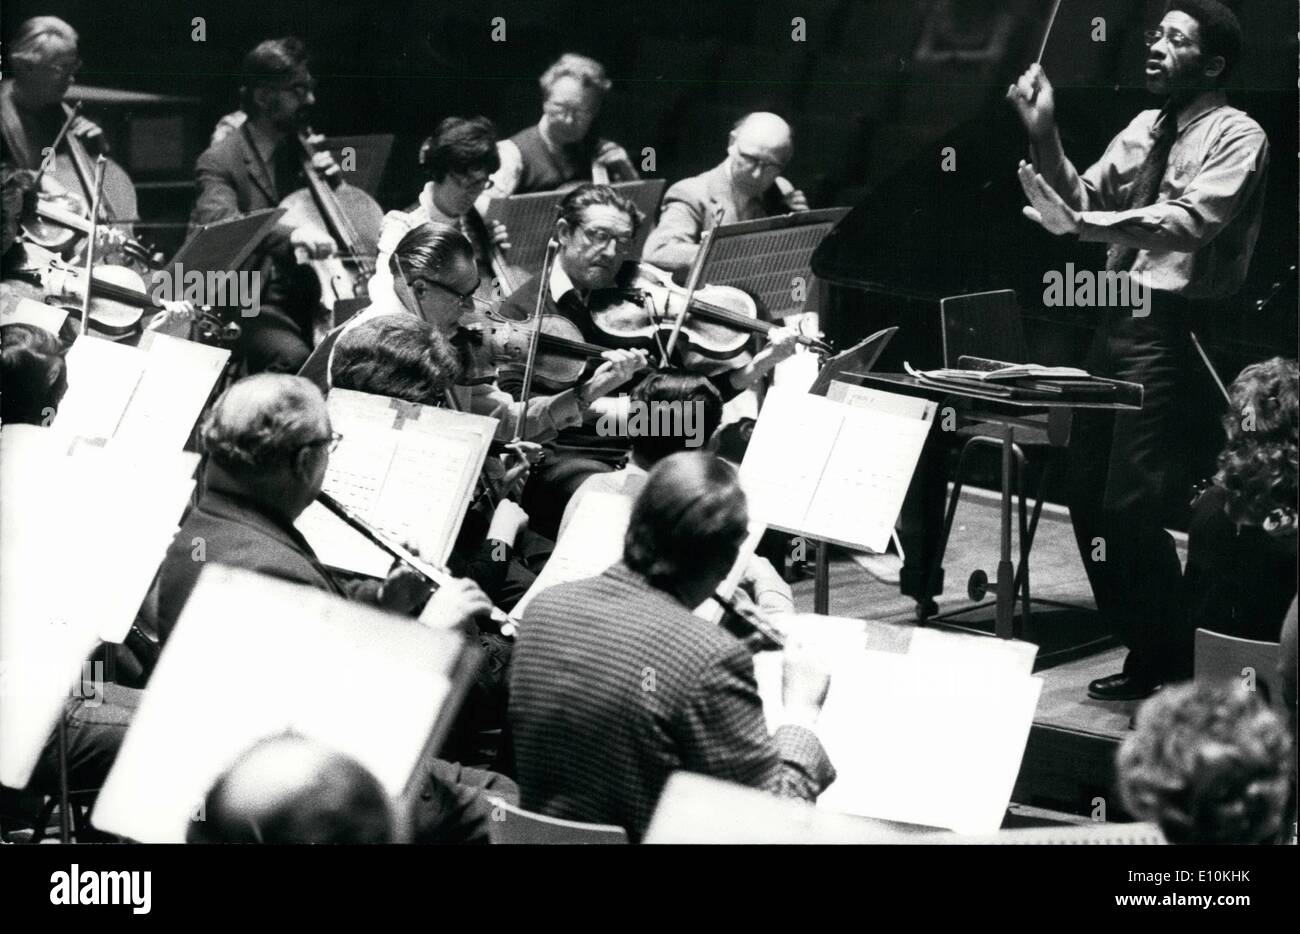 Apr. 04, 1973 - Black American conductor makes London debut with the new Philharmonic orchestra.: The black American conductor James Frazier Jnr, will make his London debut with the New Philharmonia Orchestra, at the Royal festival hall tomorrow night. He was rehearsing there today. Photo shows view showing James Frazier Jnr conducting the orchestra, during today's rehearsal. Stock Photo